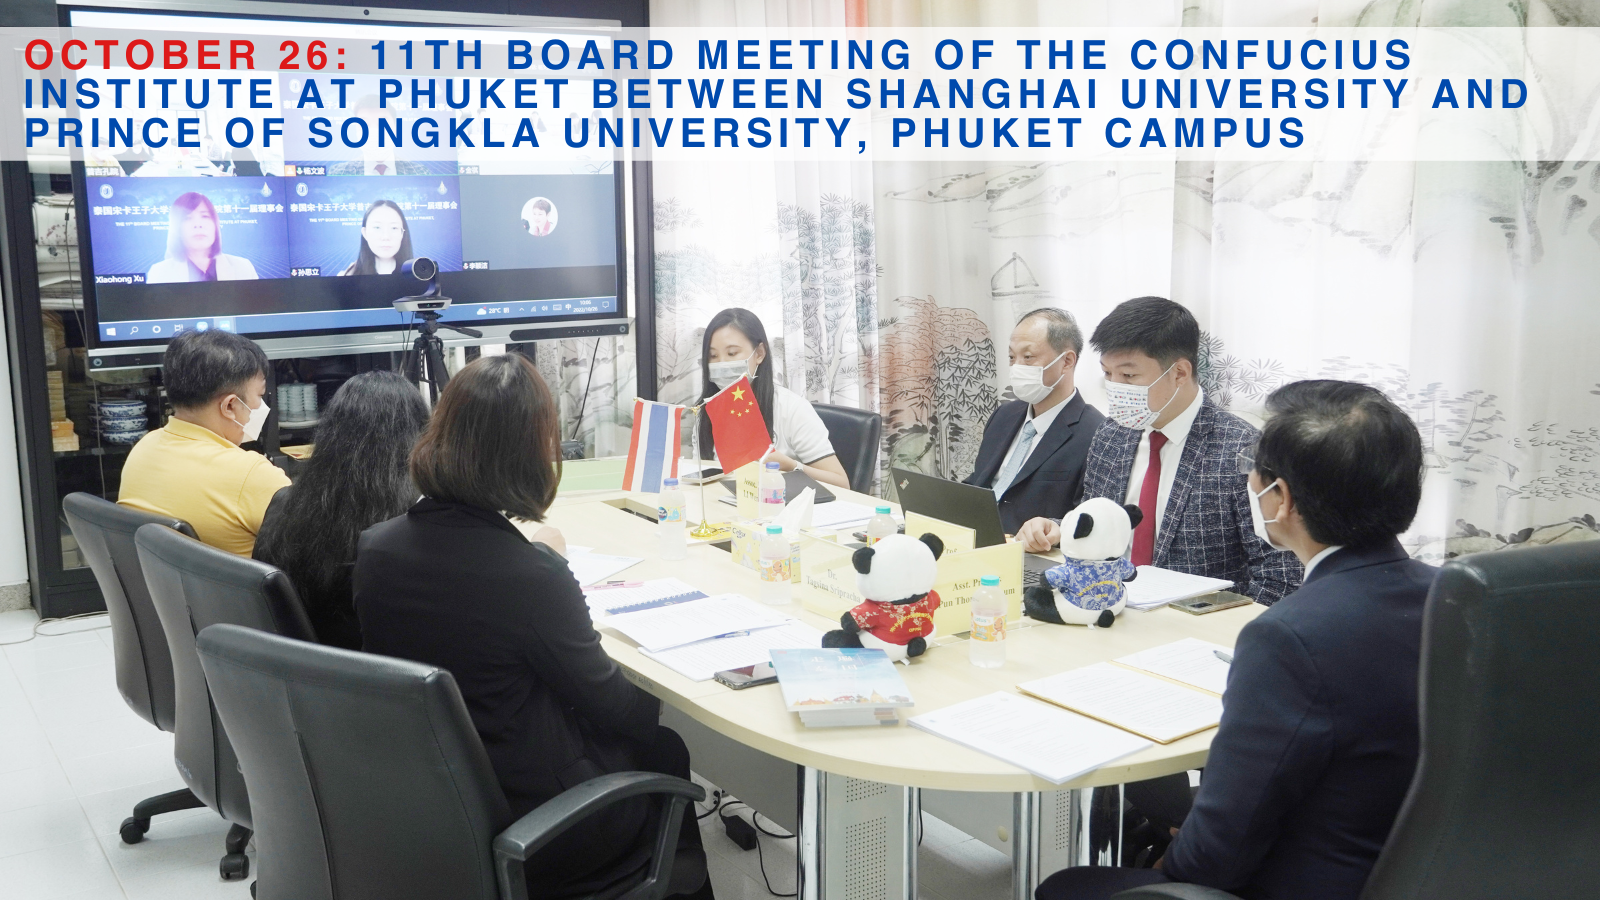 October 26: 11th Board Meeting of the Confucius Institute at Phuket between Shanghai University and Prince of Songkla University, Phuket Campus